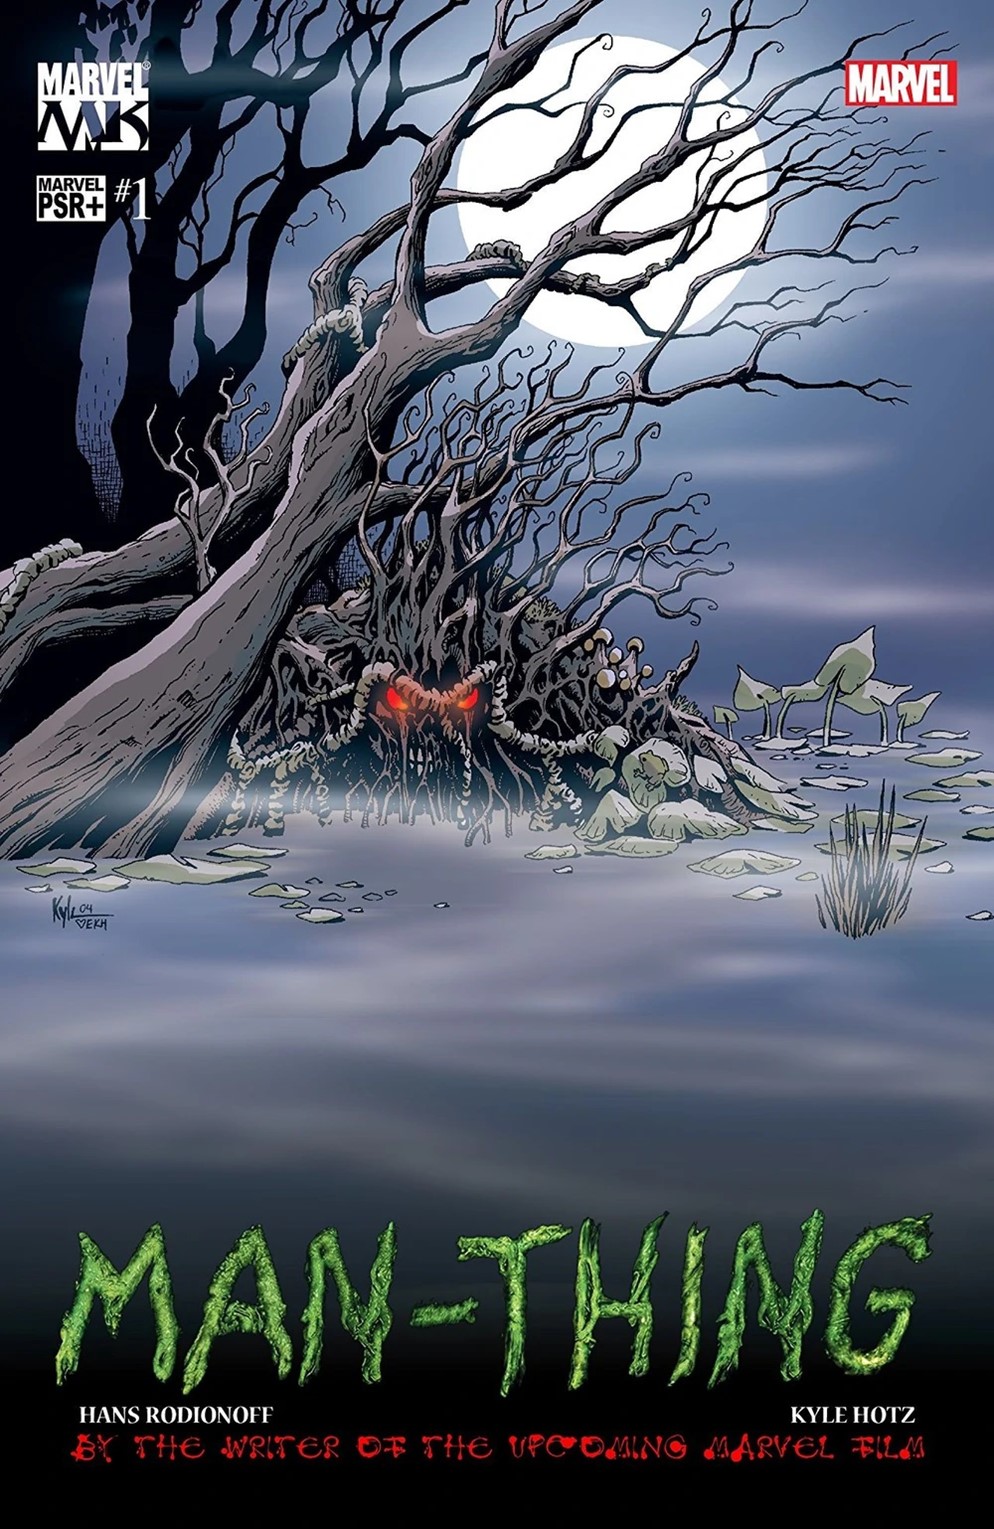 Man-Thing Volume 4 Limited Series Bundle Issues 1-3